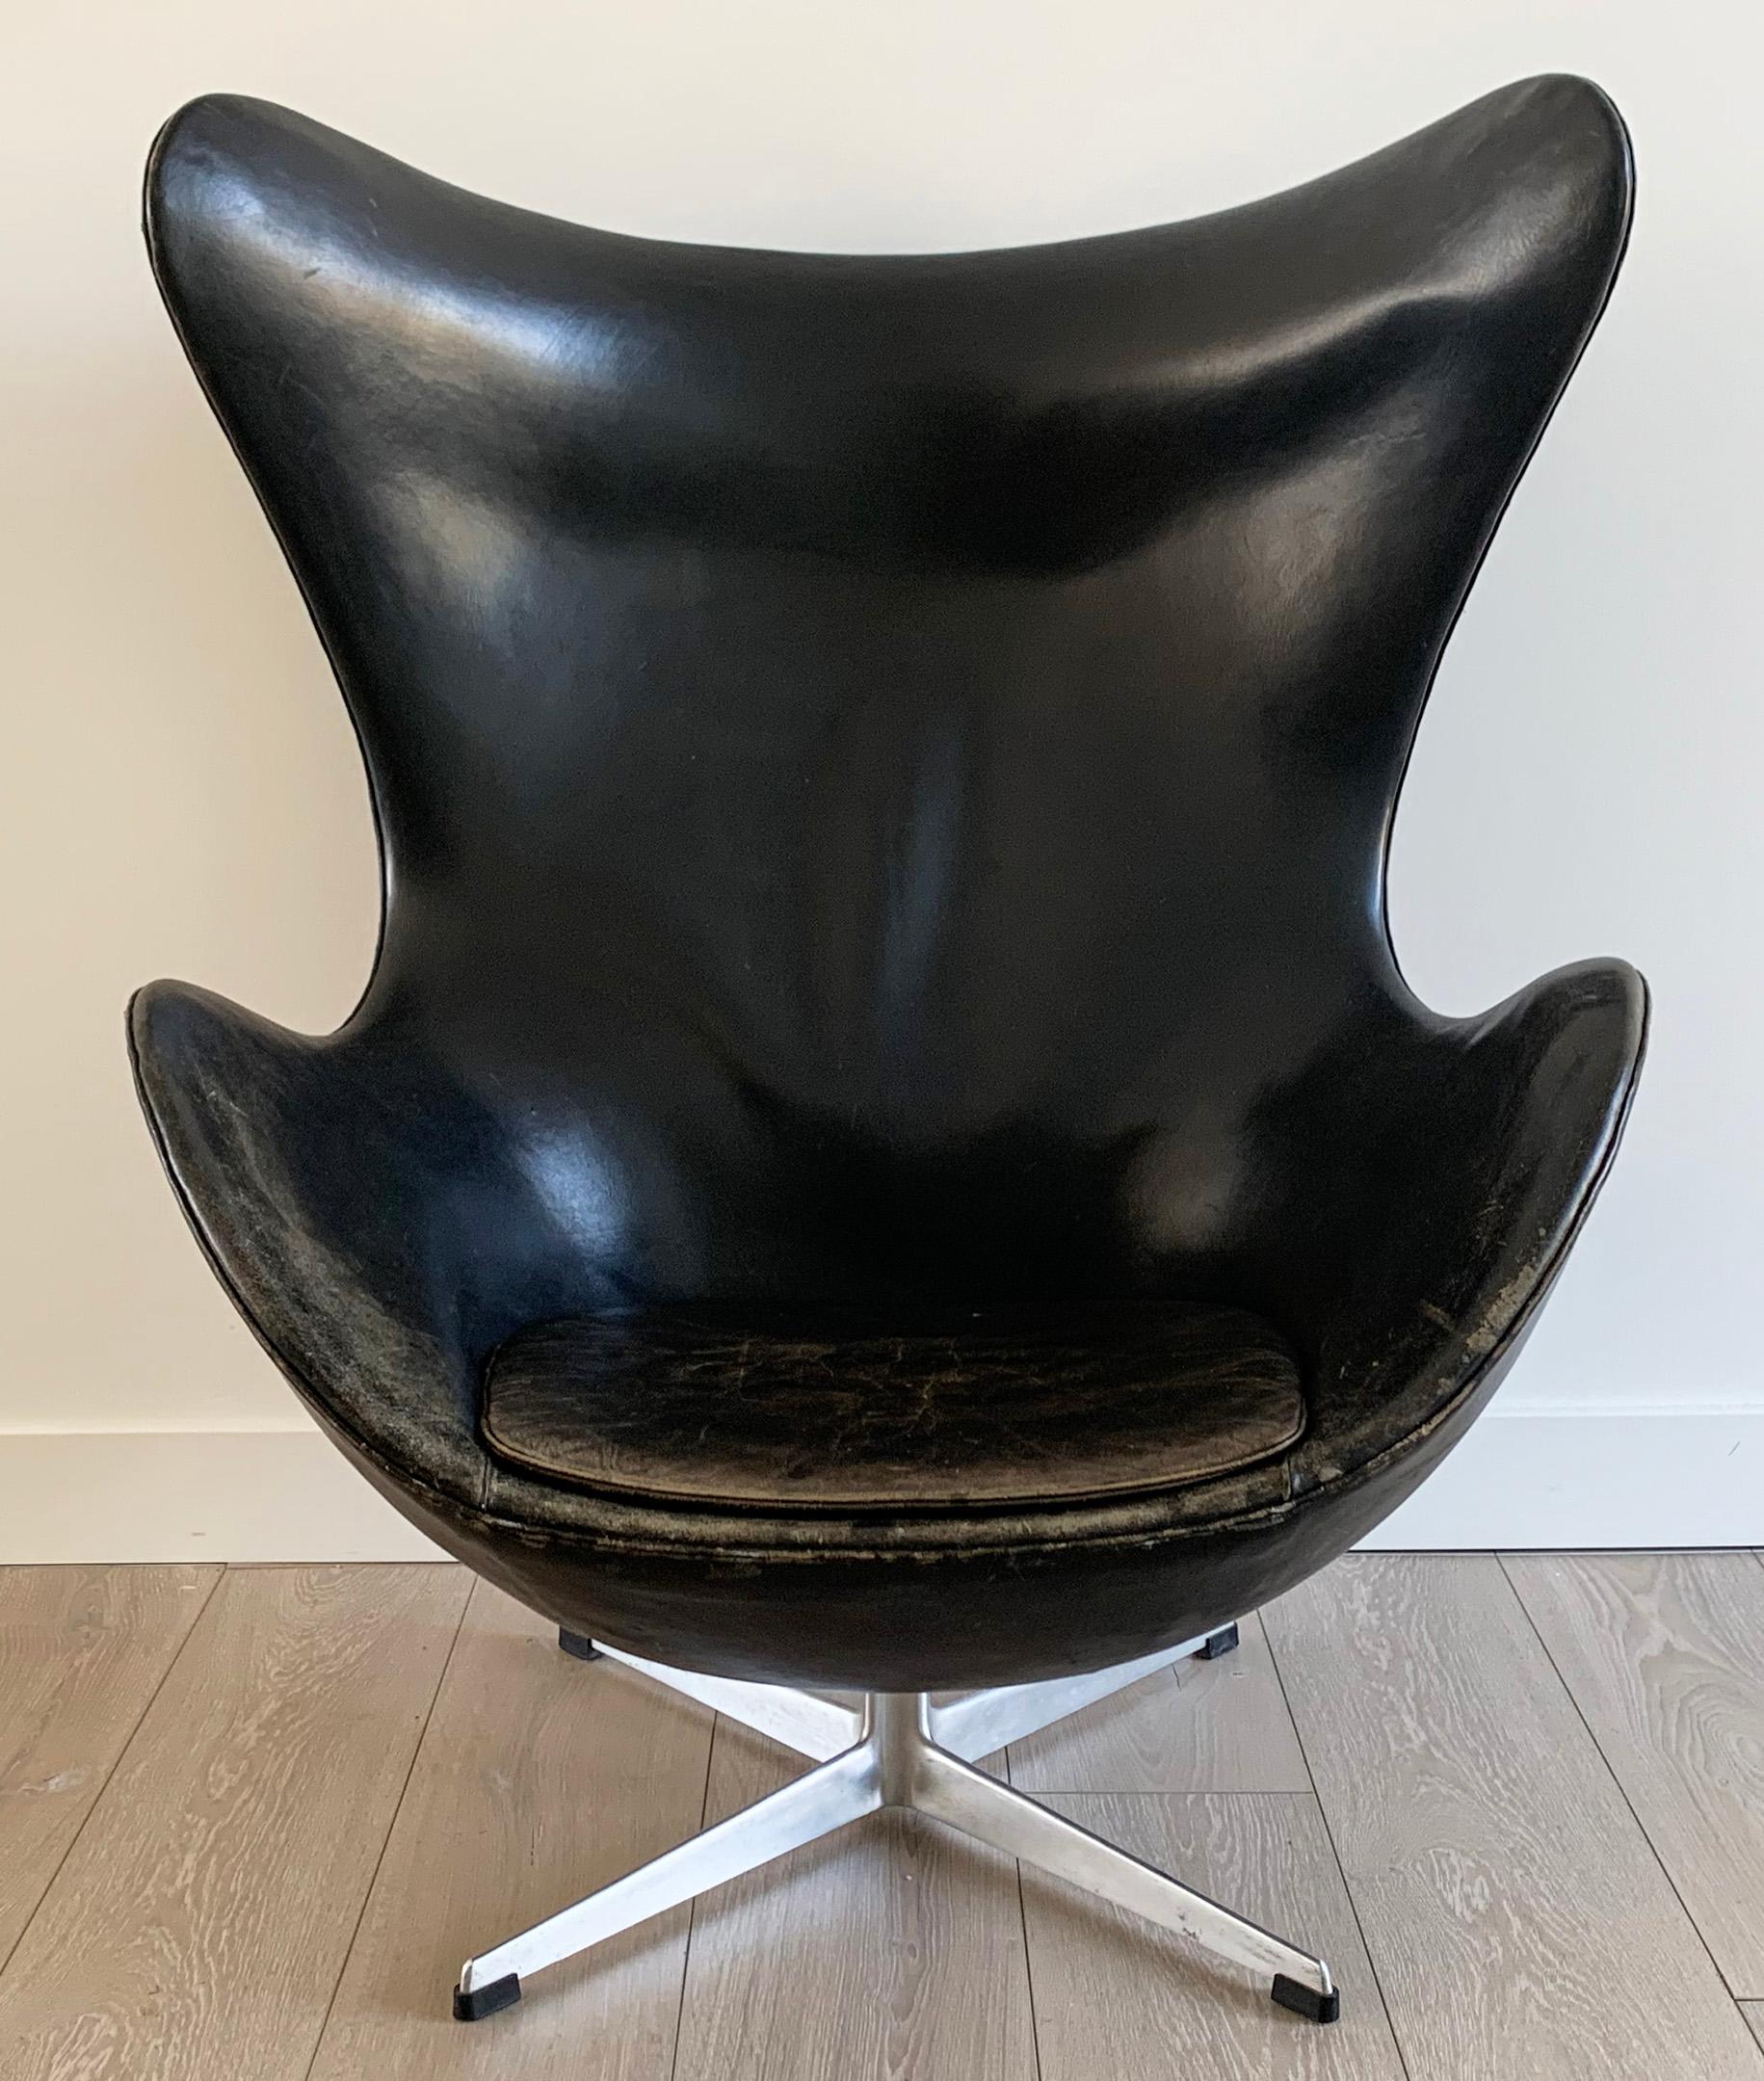 Have you ever just looked and a chair and thought this is it? Well, this indeed is it. A signed, Arne Jacobsen for Fritz Hansen egg chair from 1963. With so many companies out there still producing lines of furniture and timeless iconic designs,